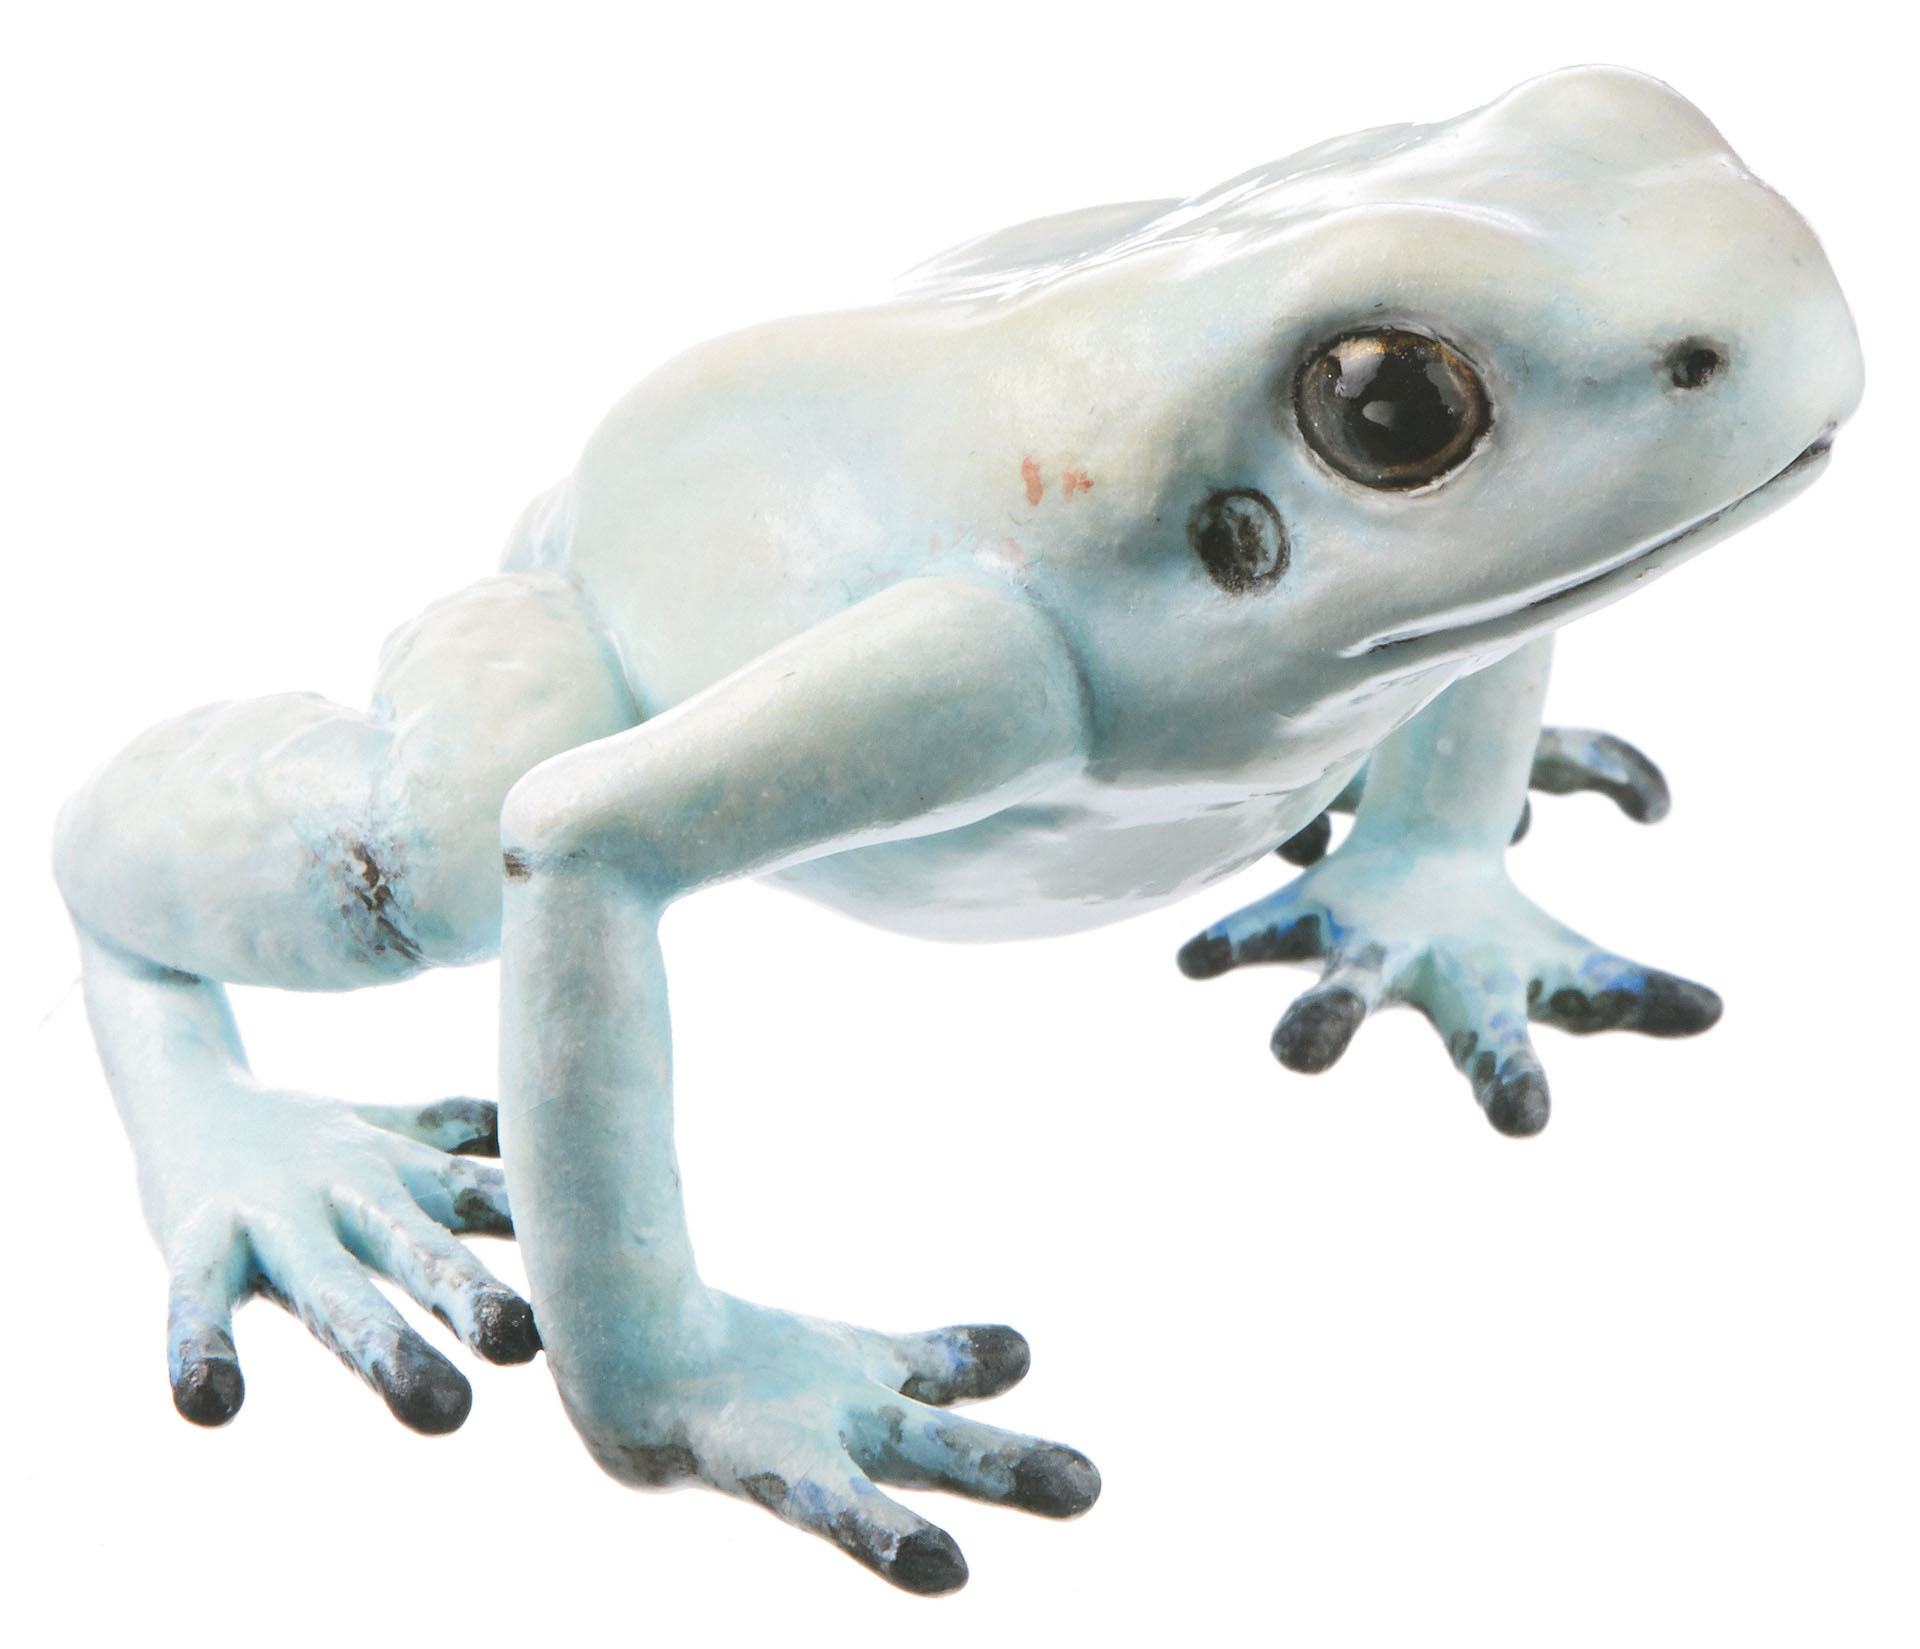 Golden Poison Frog “La Brea” Cream-Coloured With a Hint of Turquoise, Female